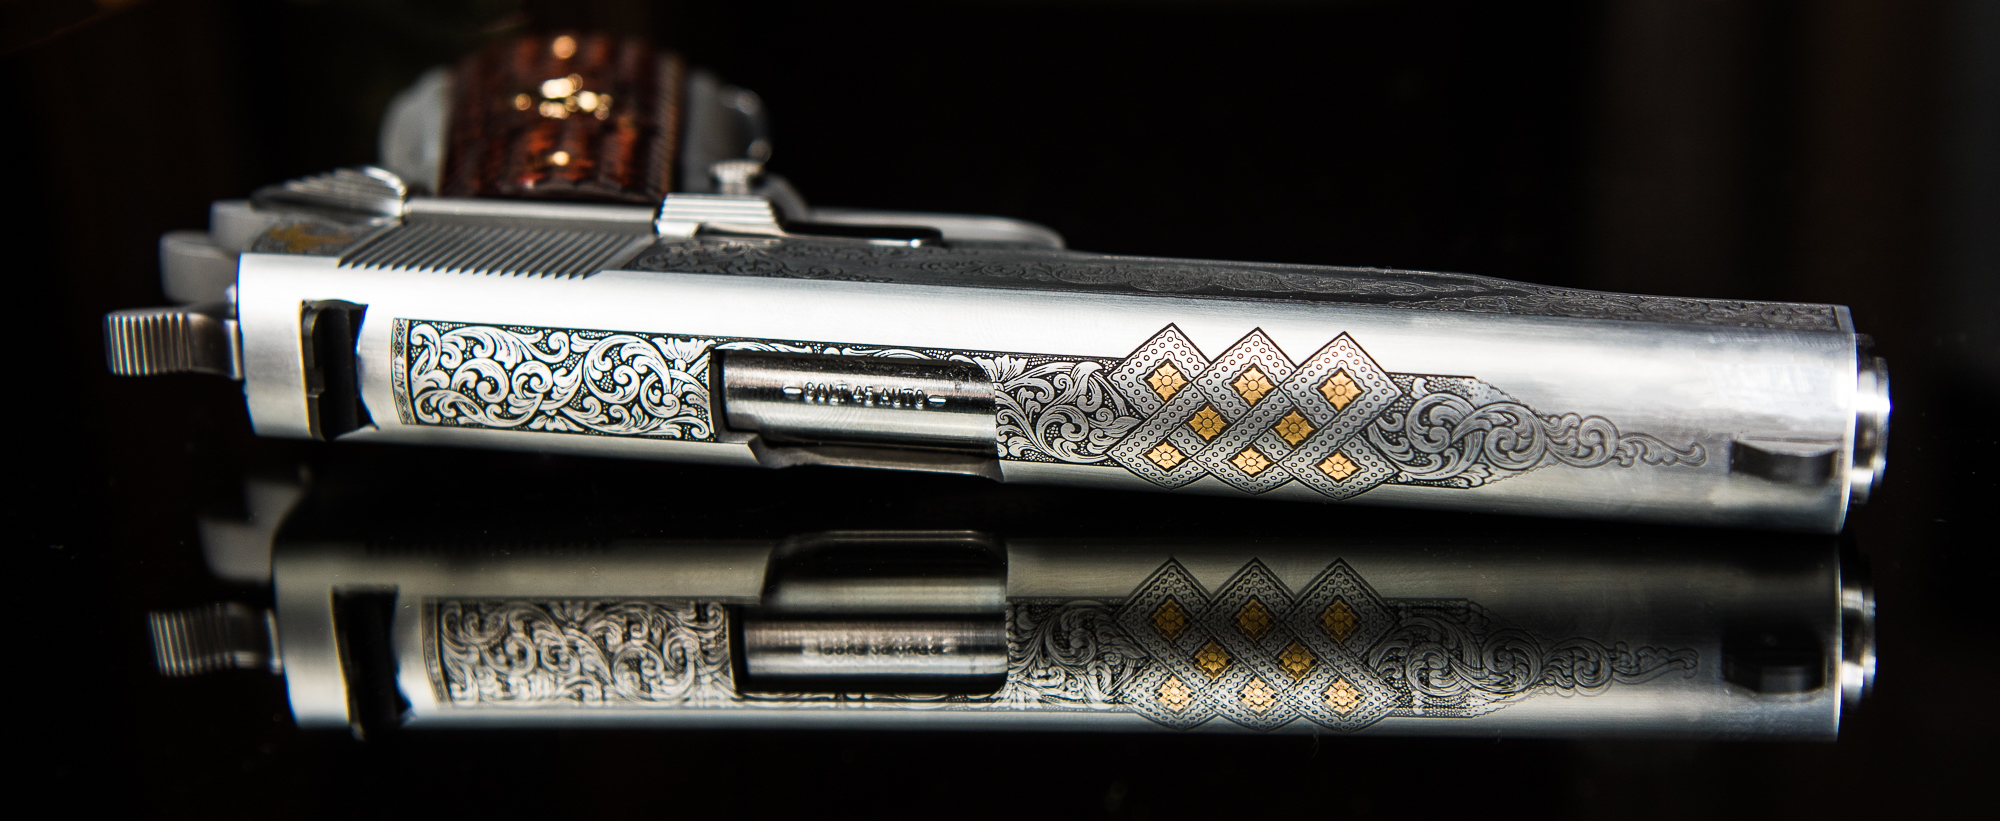 Gorgeous New Talo Exclusives: an Engraved Colt 1911 and a Turnbull Ruger Super Blackhawk